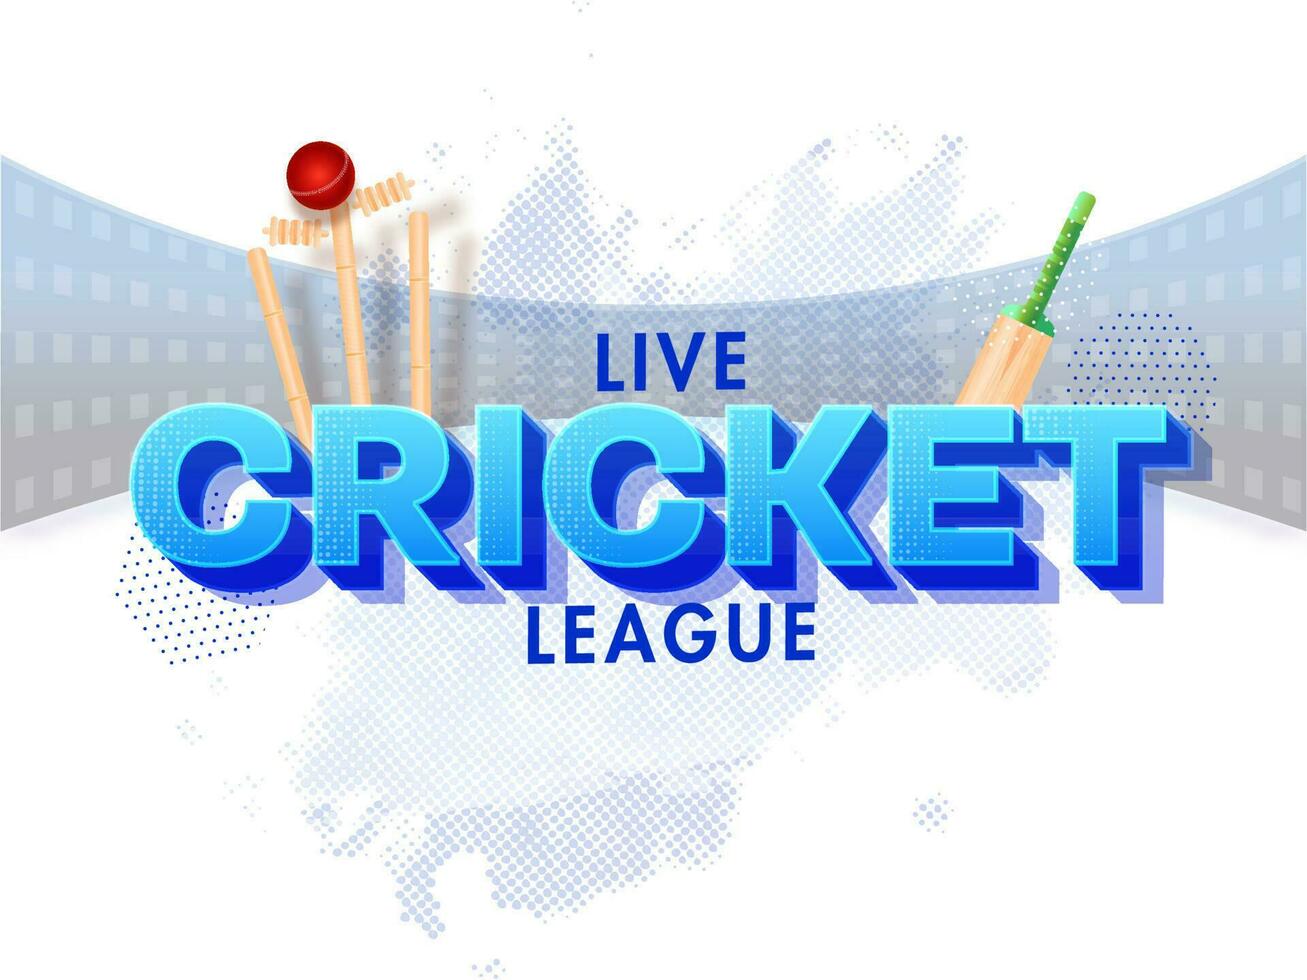 Blue Live Cricket League Text With Red Ball Hitting Wicket Stumps And Bat On White Halftone Stadium Background. vector